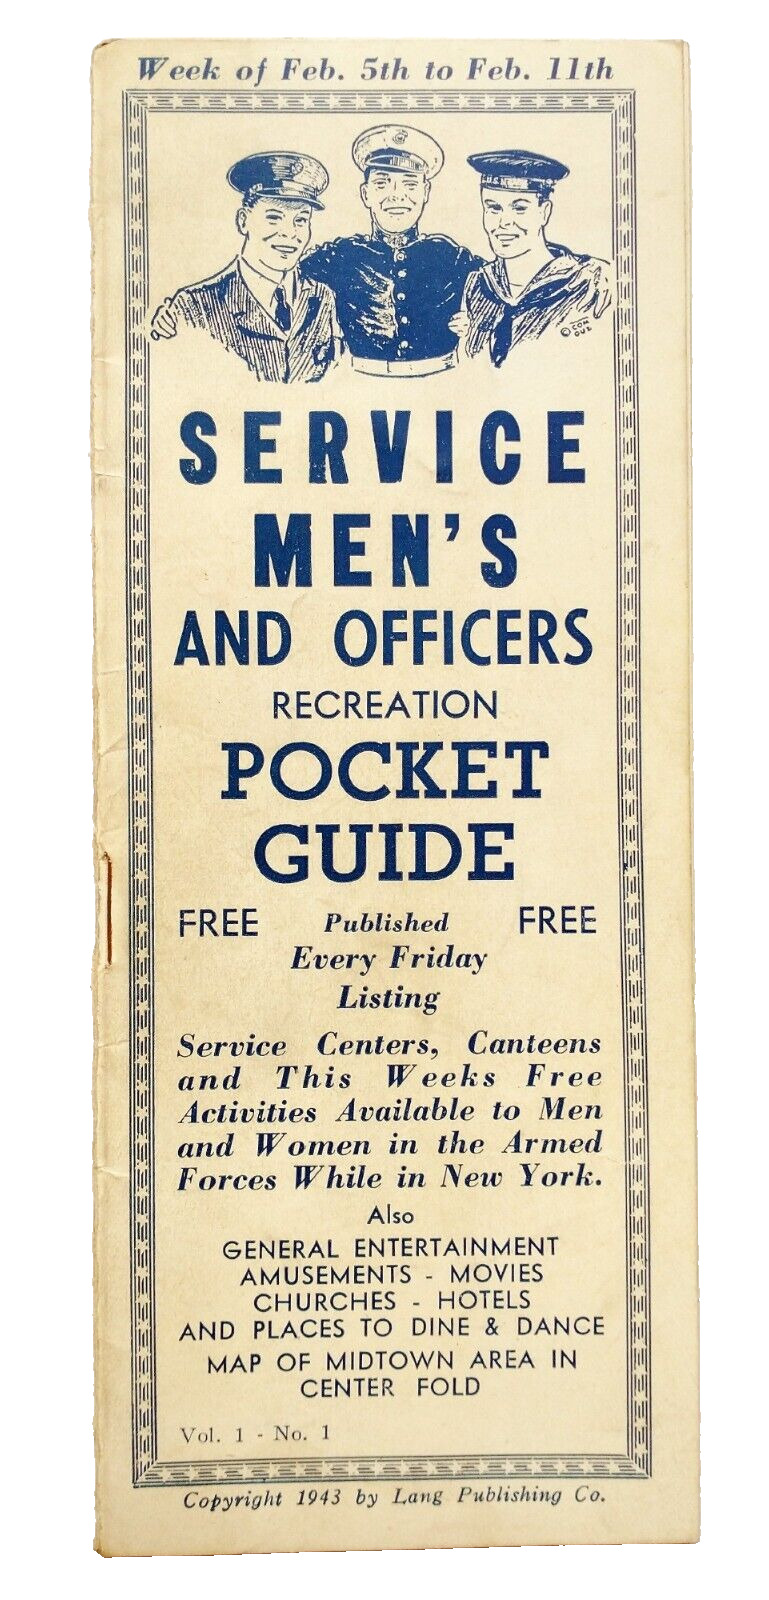 Service Men's and Officers Recreation Pocket Guide WWII 1943 New York